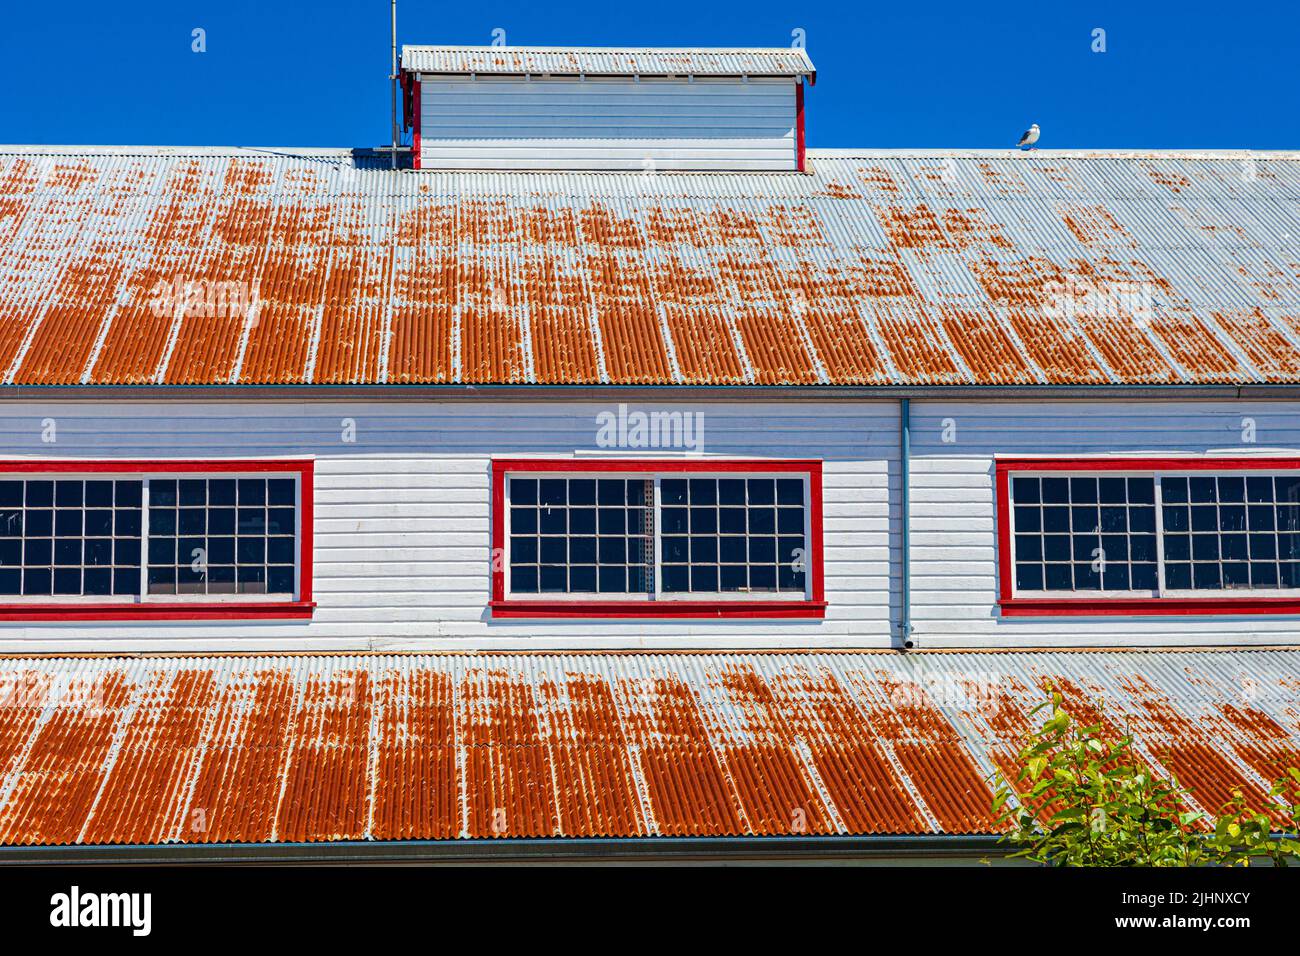 Corroded roof of a warehouse in a marine environment in Steveston British Columbia Canada Stock Photo